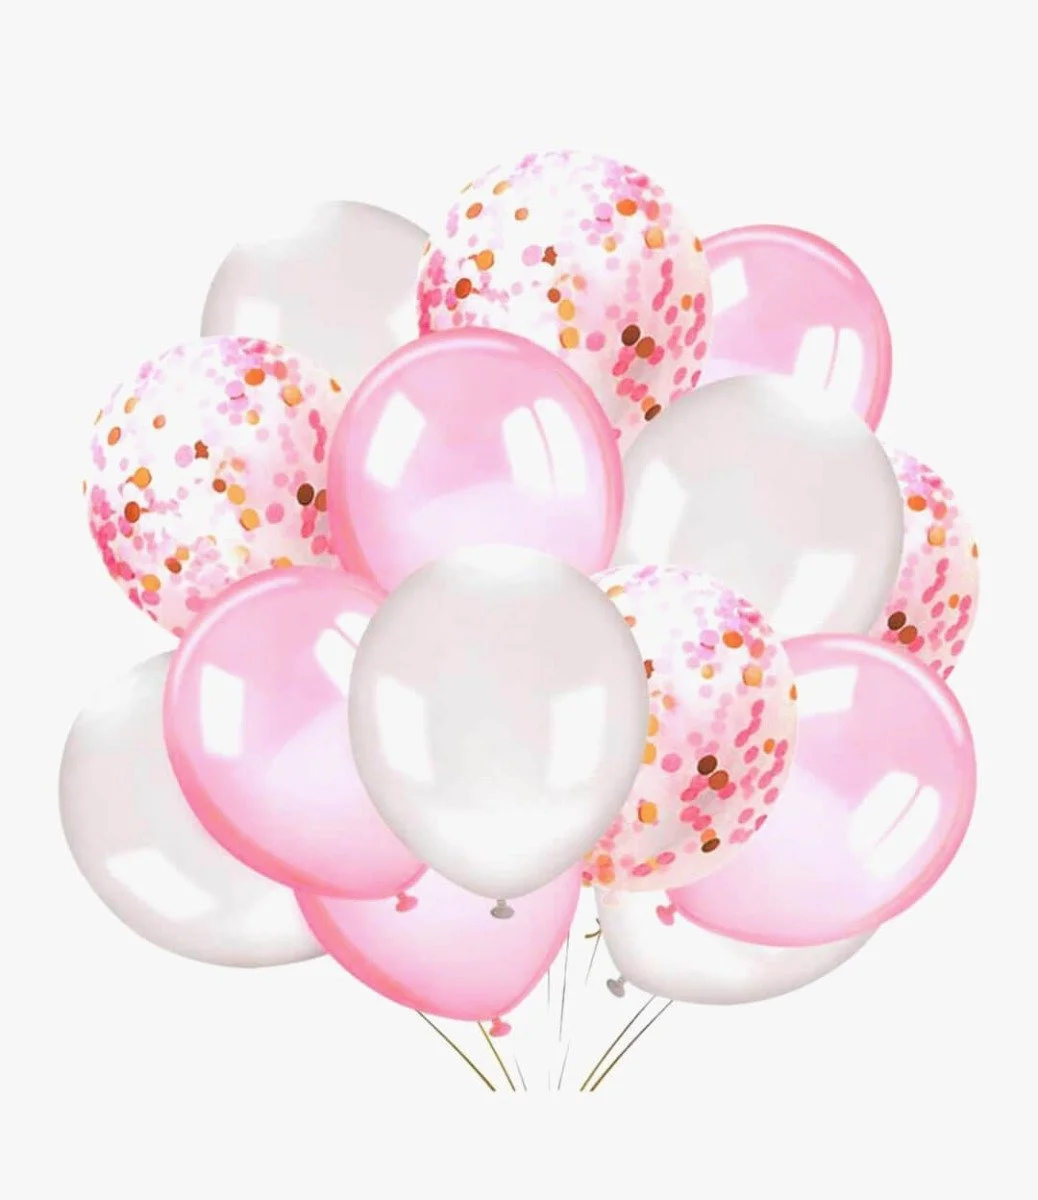 The Pink Surprise Latex Balloons